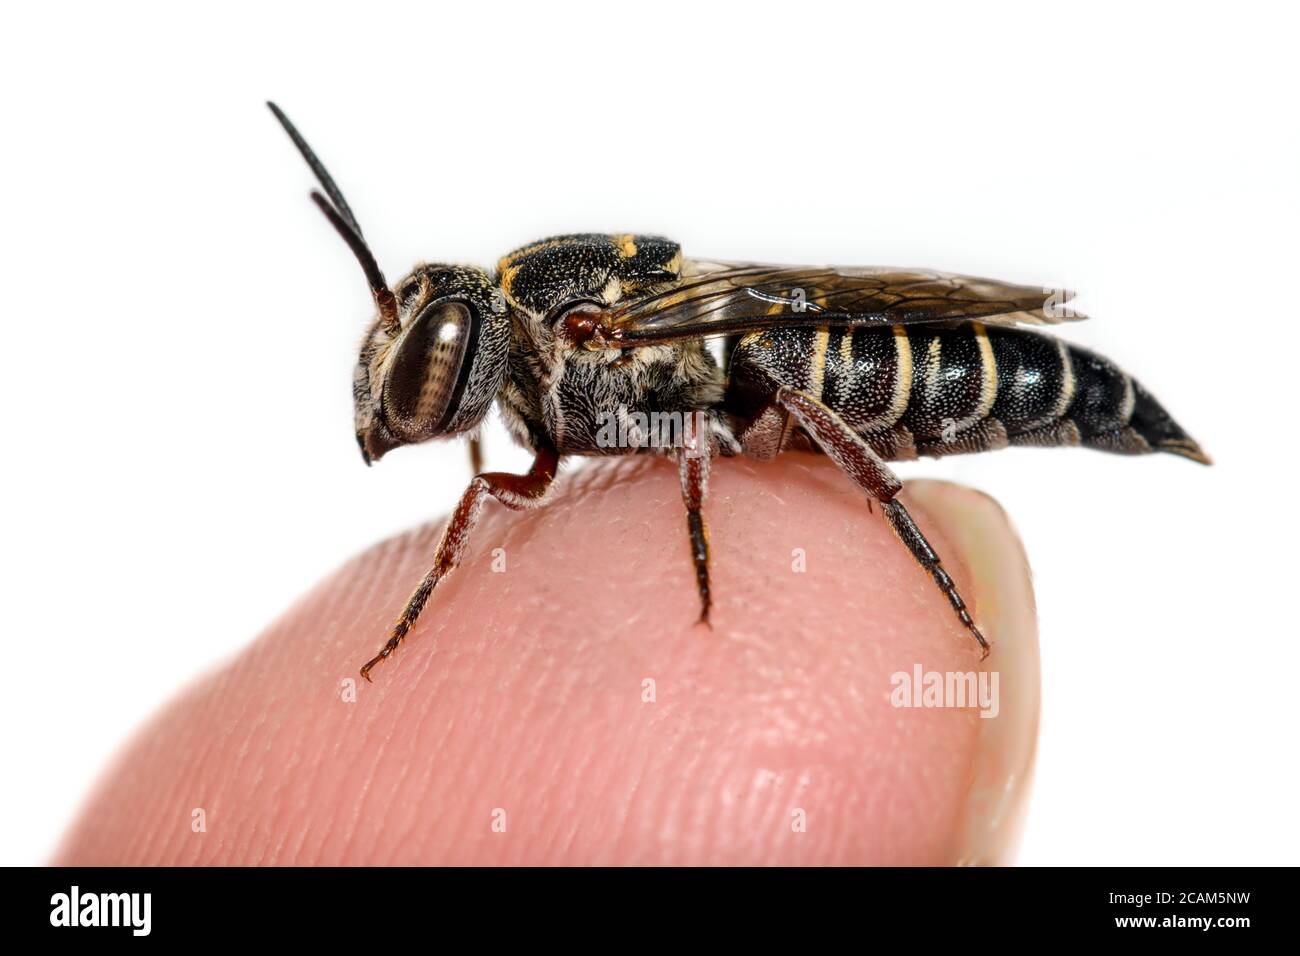 Coelioxys - Cuckoo-leaf-cutter Bee on tip of finger Stock Photo